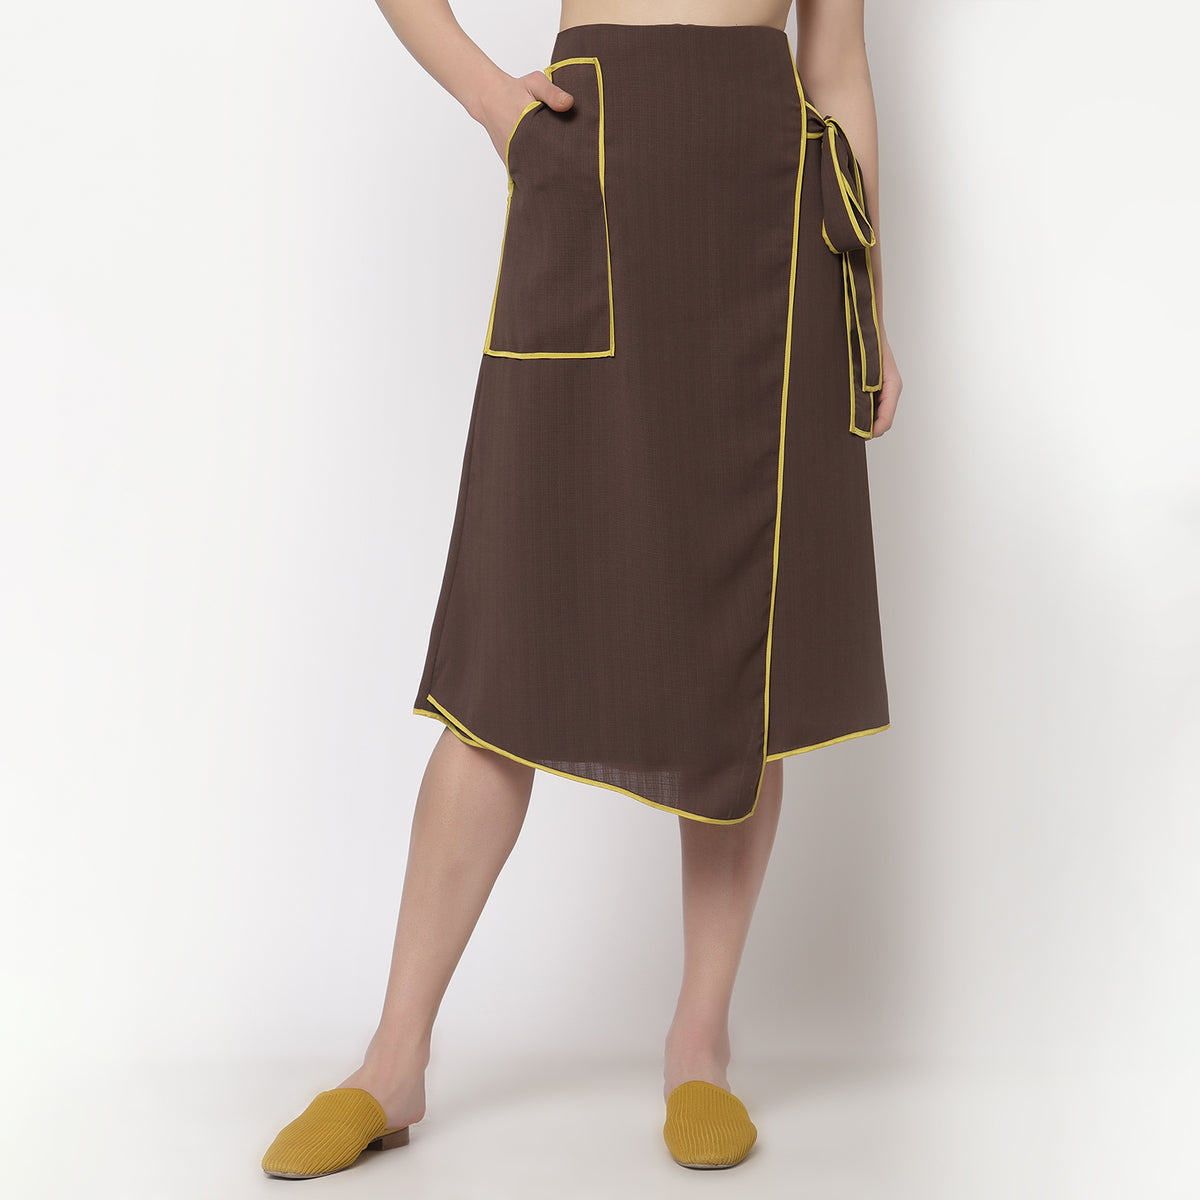 Brown asymetrical skirt with yellow piping